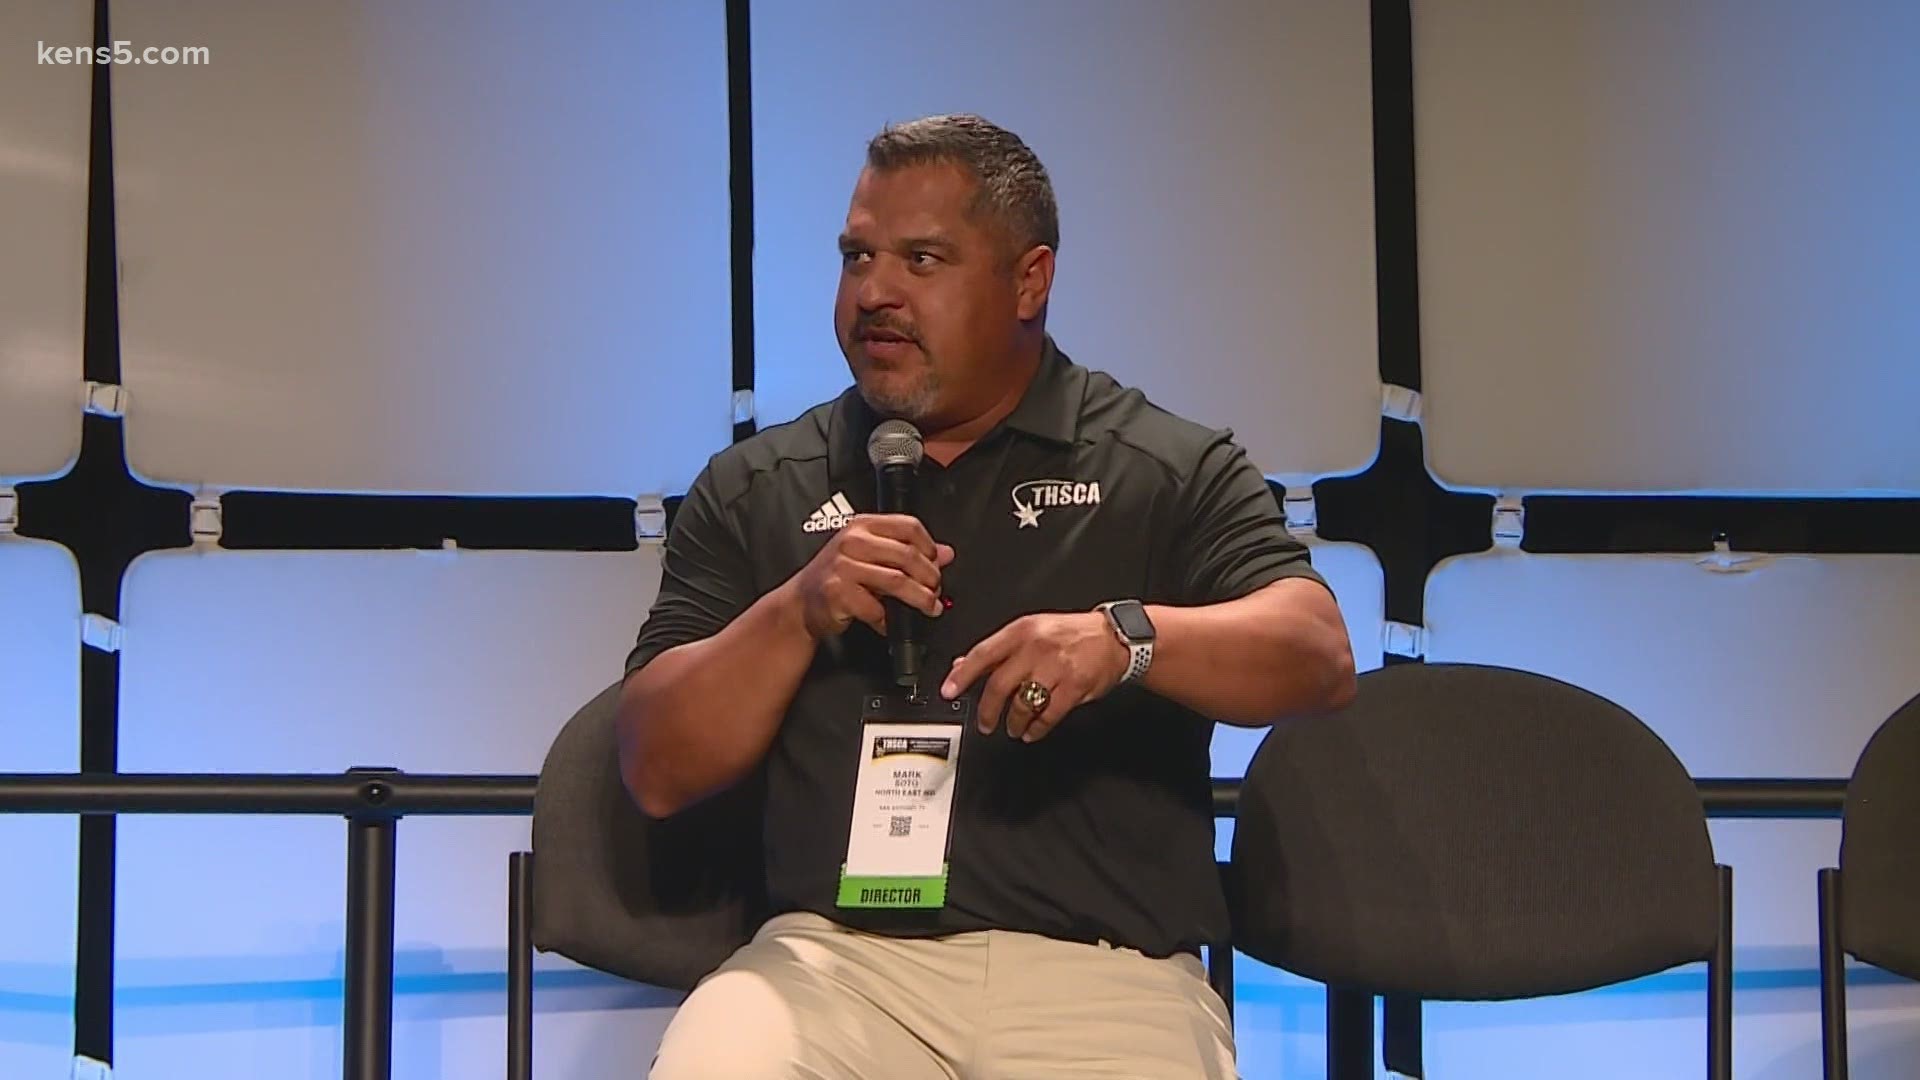 THSCA created a program that will help new coaches get acclimated to a coaching life style while learning how to discuss impacting life topics.